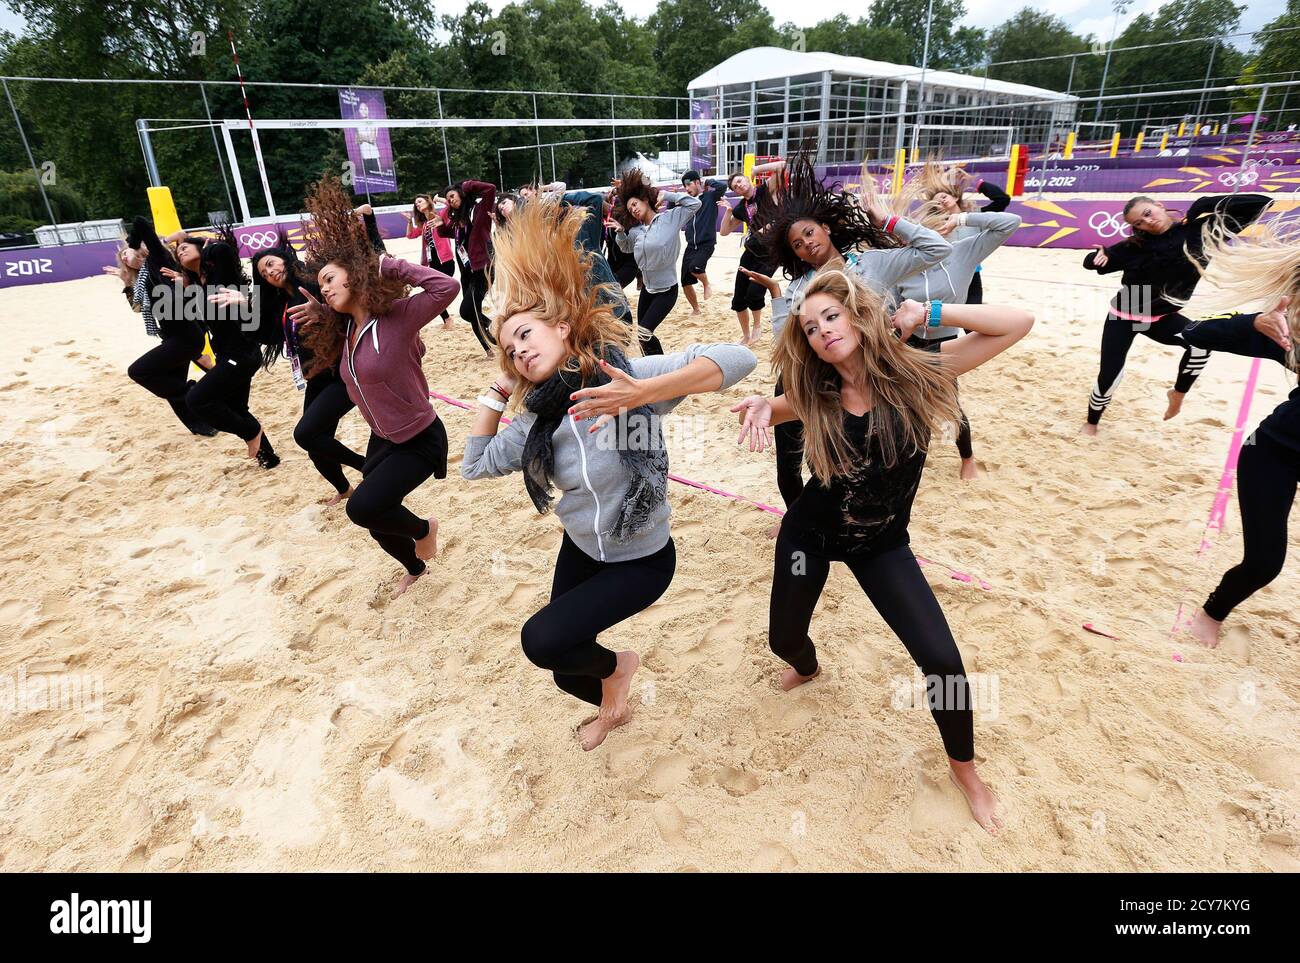 Dancers rehearse at the London 2012 Olympics beach volleyball venue in central London July 19, 2012. REUTERS/Suzanne Plunkett (BRITAIN - Tags: SPORT OLYMPICS SOCIETY VOLLEYBALL ENTERTAINMENT) Stock Photo